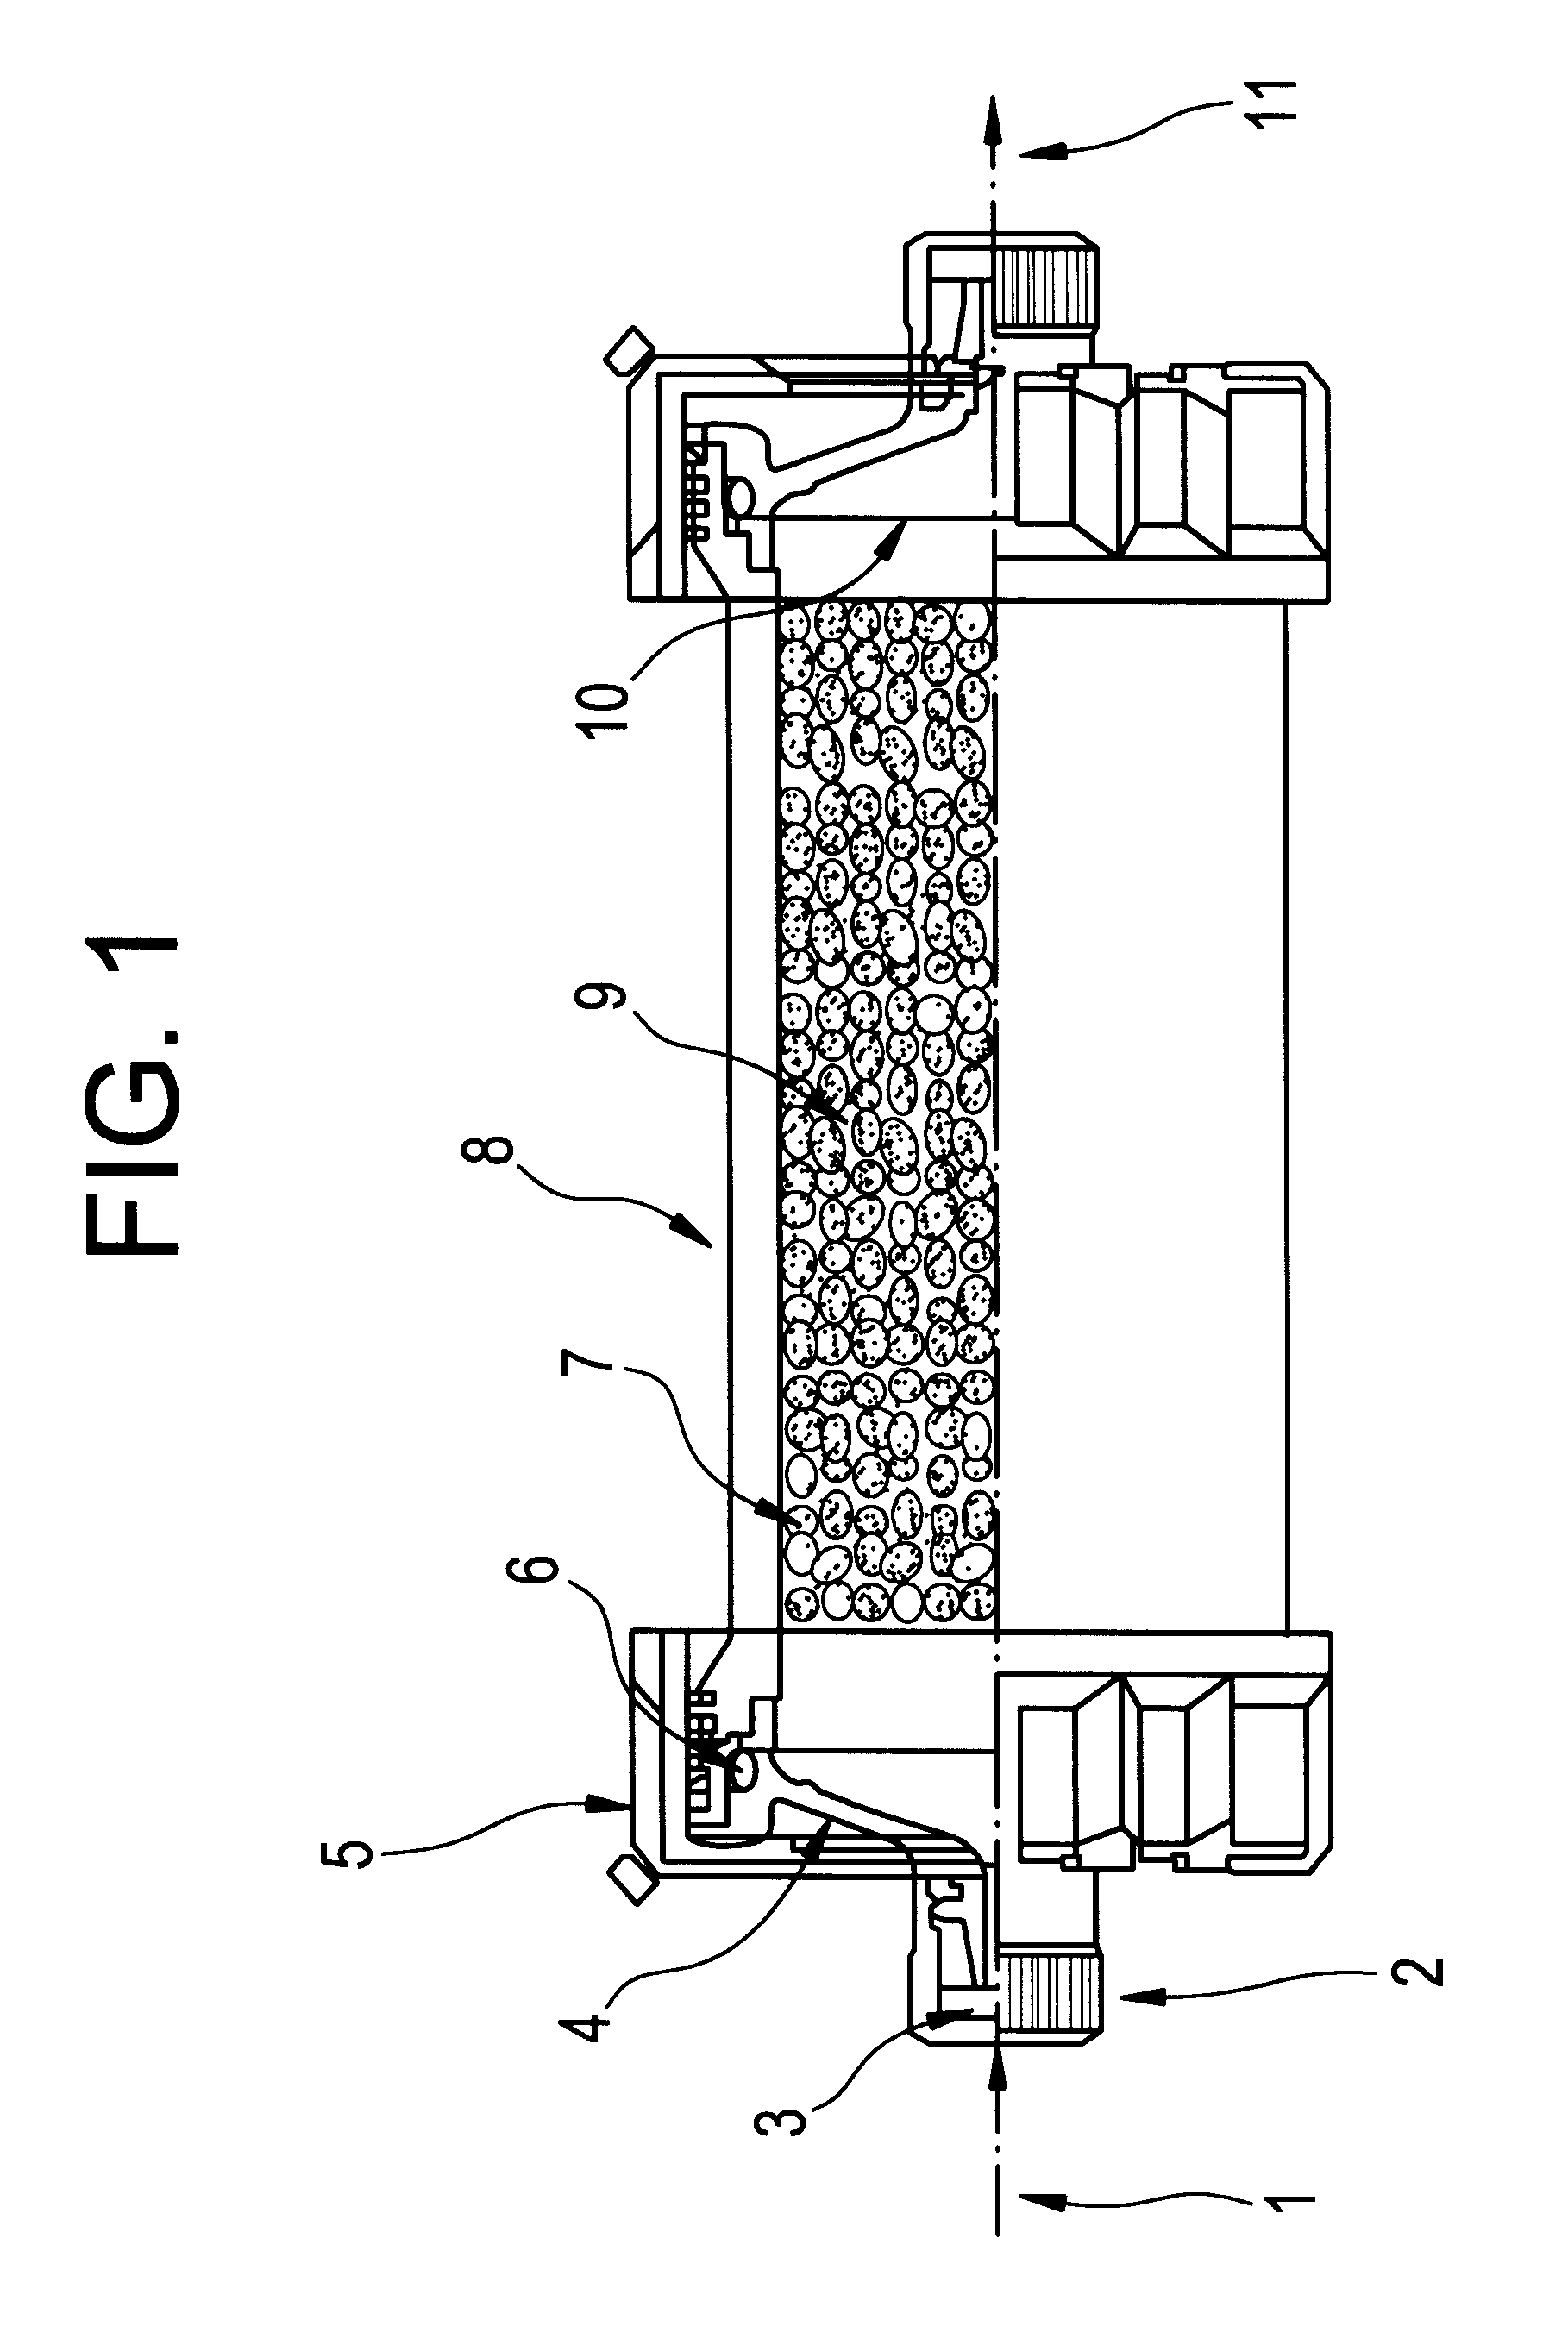 Methods of treatment of disease using adsorbent carriers